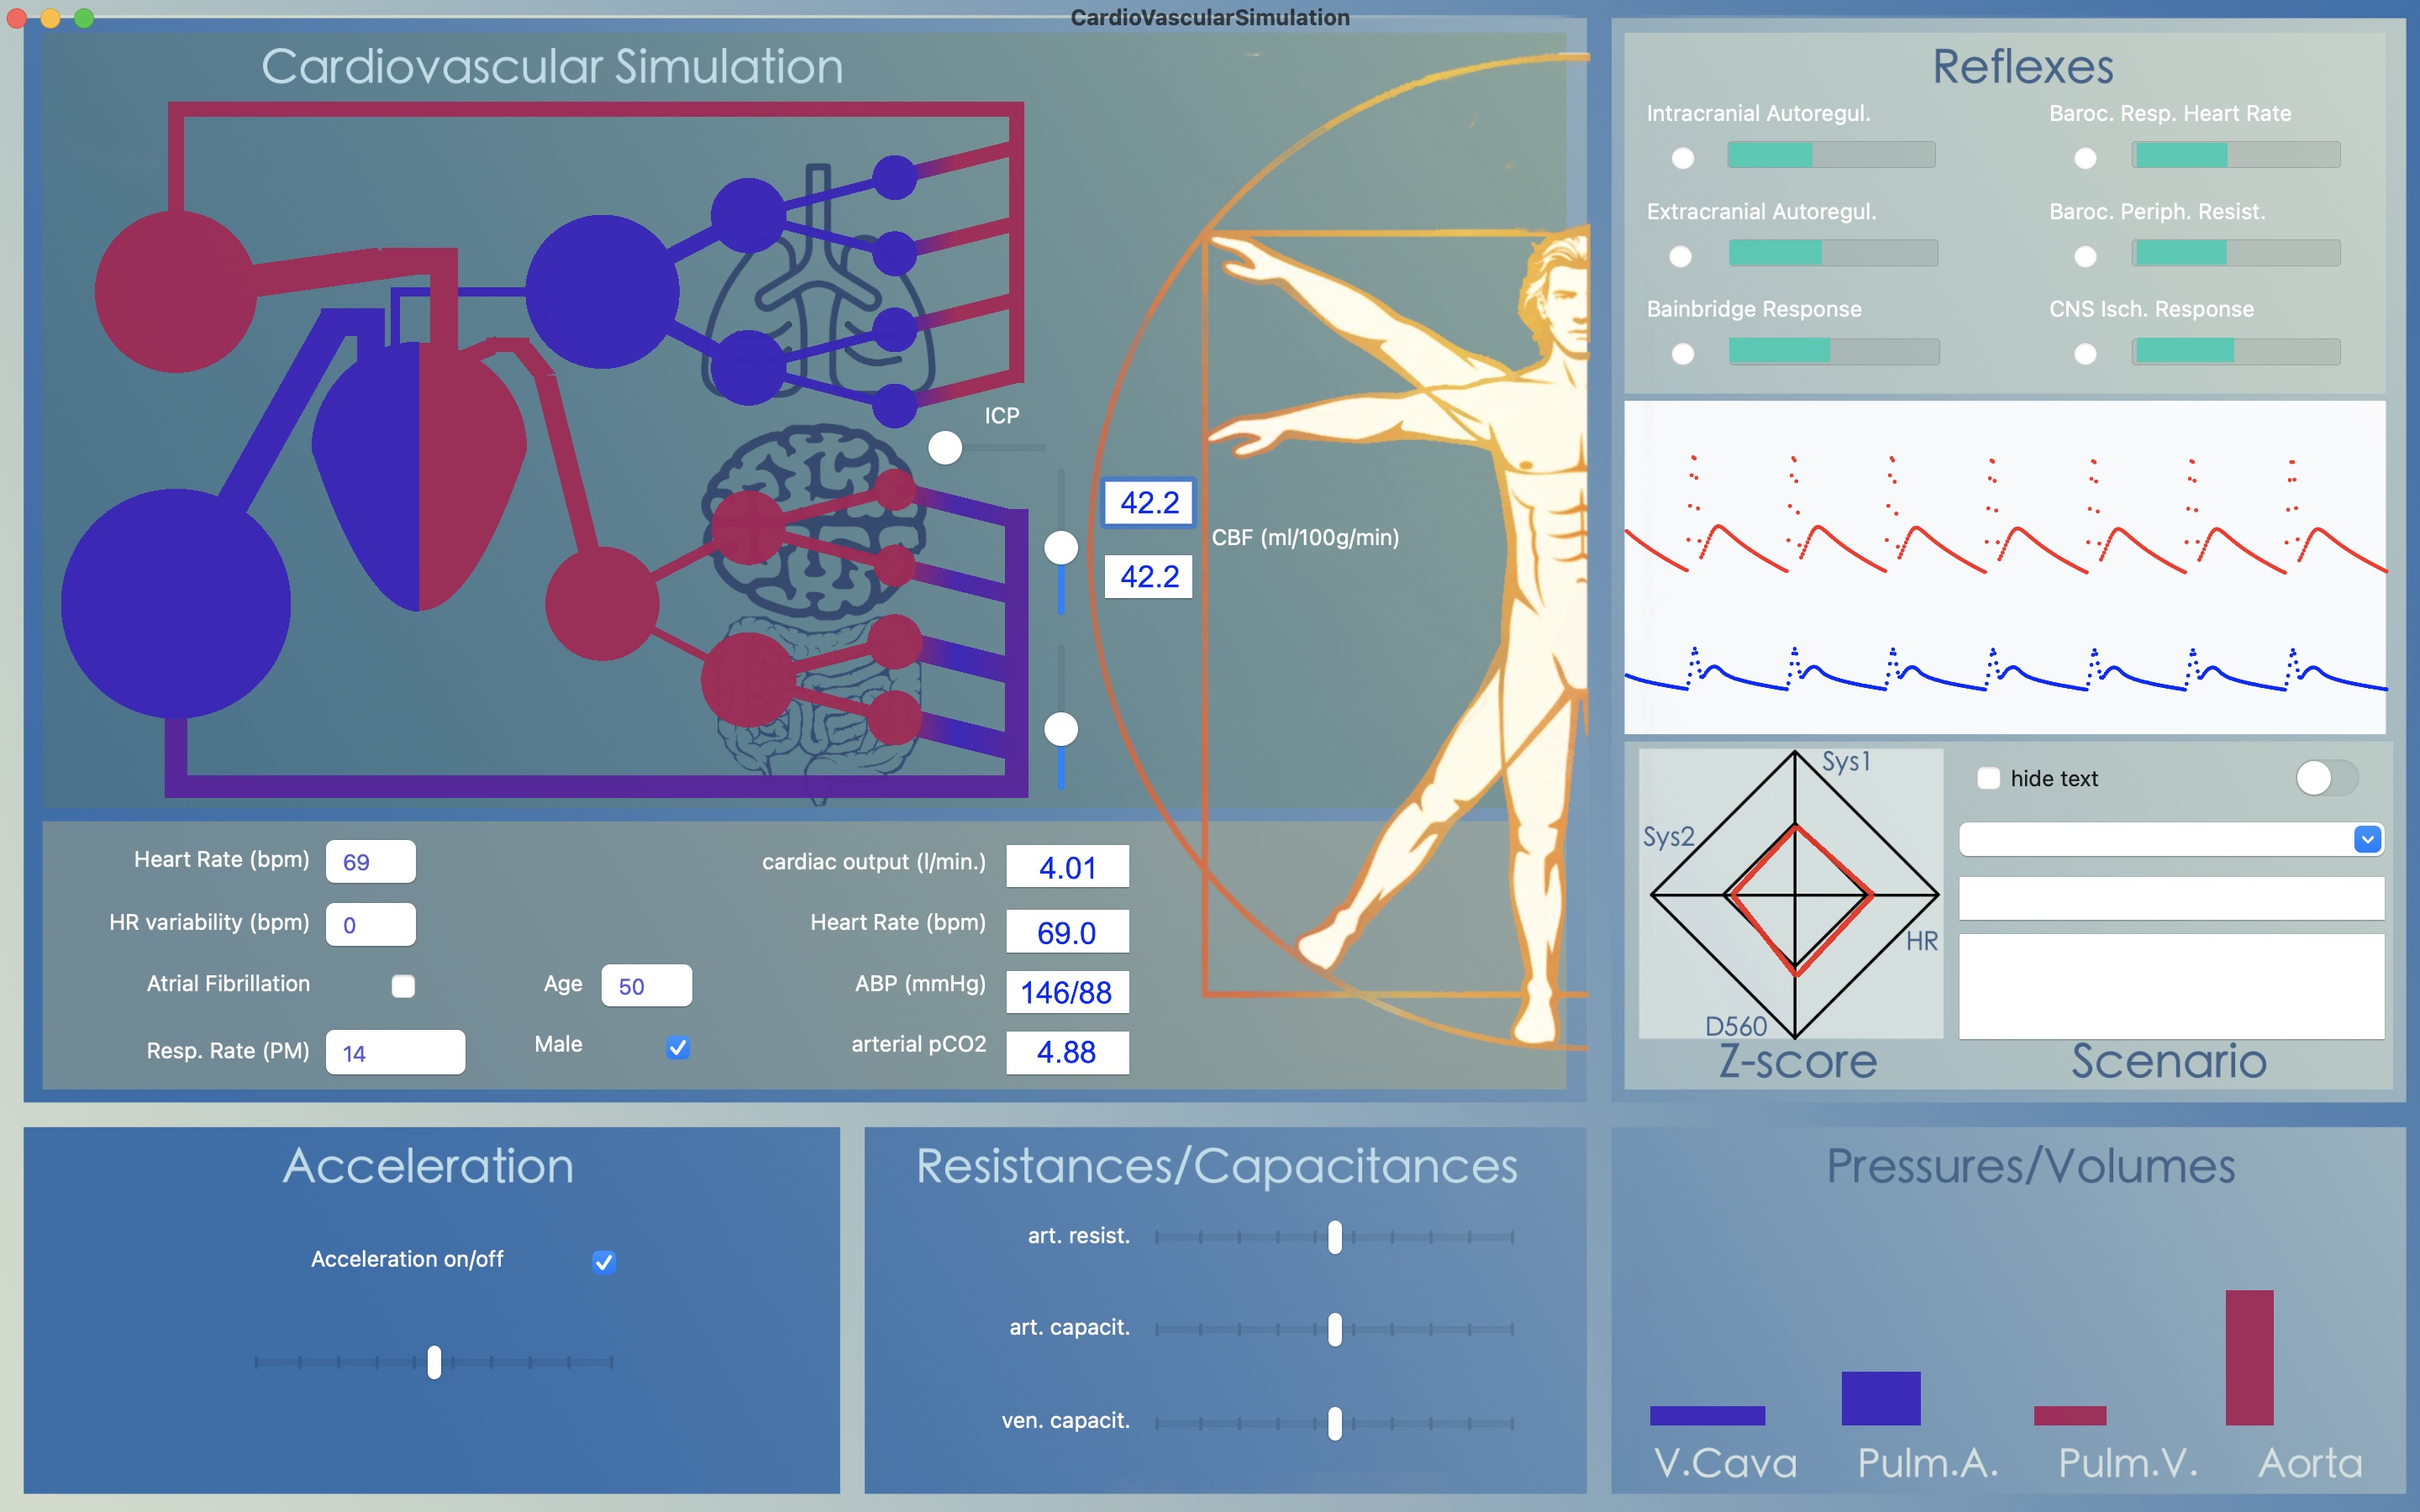 CardioVascularSimulationApp version 1.7 available from the AppStore